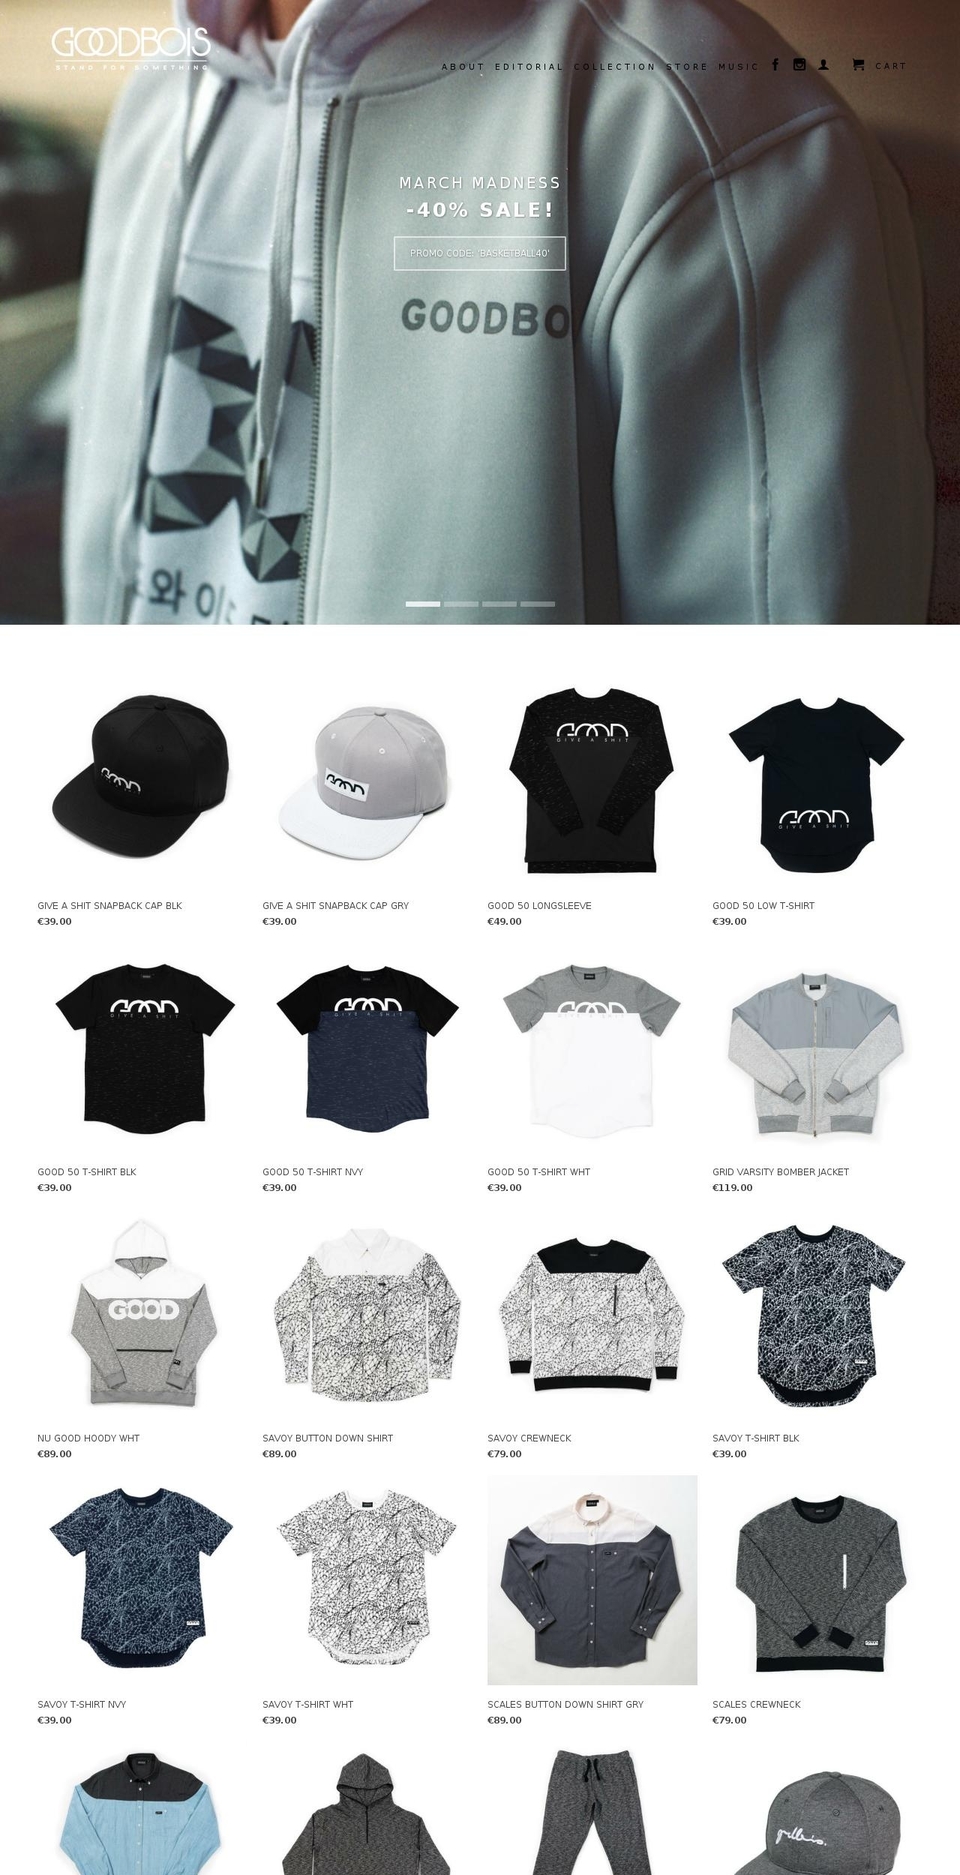 GOODBOIS__Cabon__NEW-COLLECTION_SS_D Shopify theme site example goodbois.net